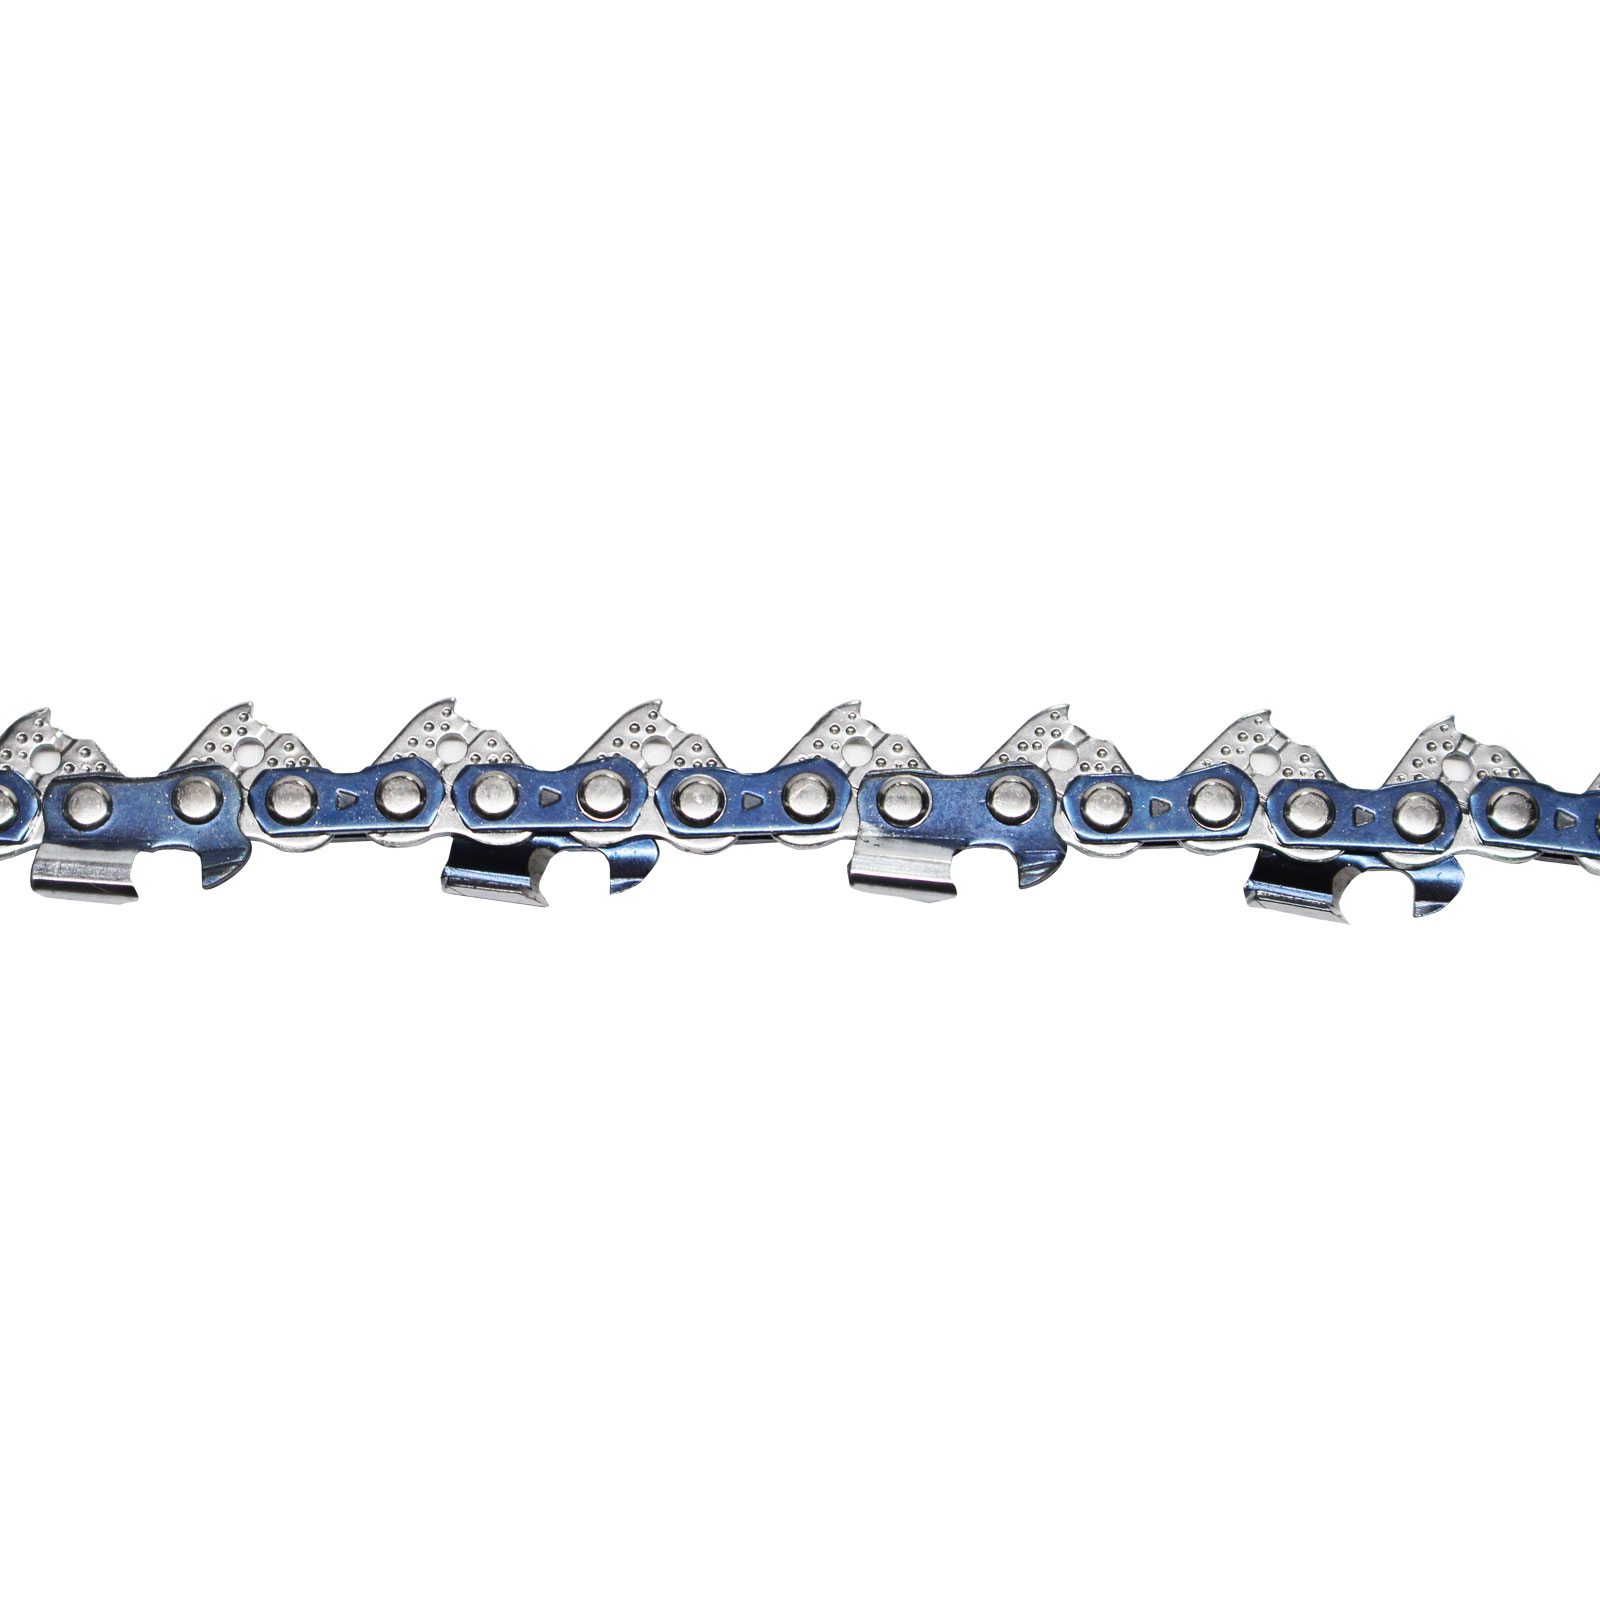 3-Pack 18" Semi Chisel Saw Chain for STIHL MS 271 Chainsaws - (18 inch, 0.325" Pitch, 0.063" Gauge, 74 Drive Links, CSC-L74) - image 4 of 4